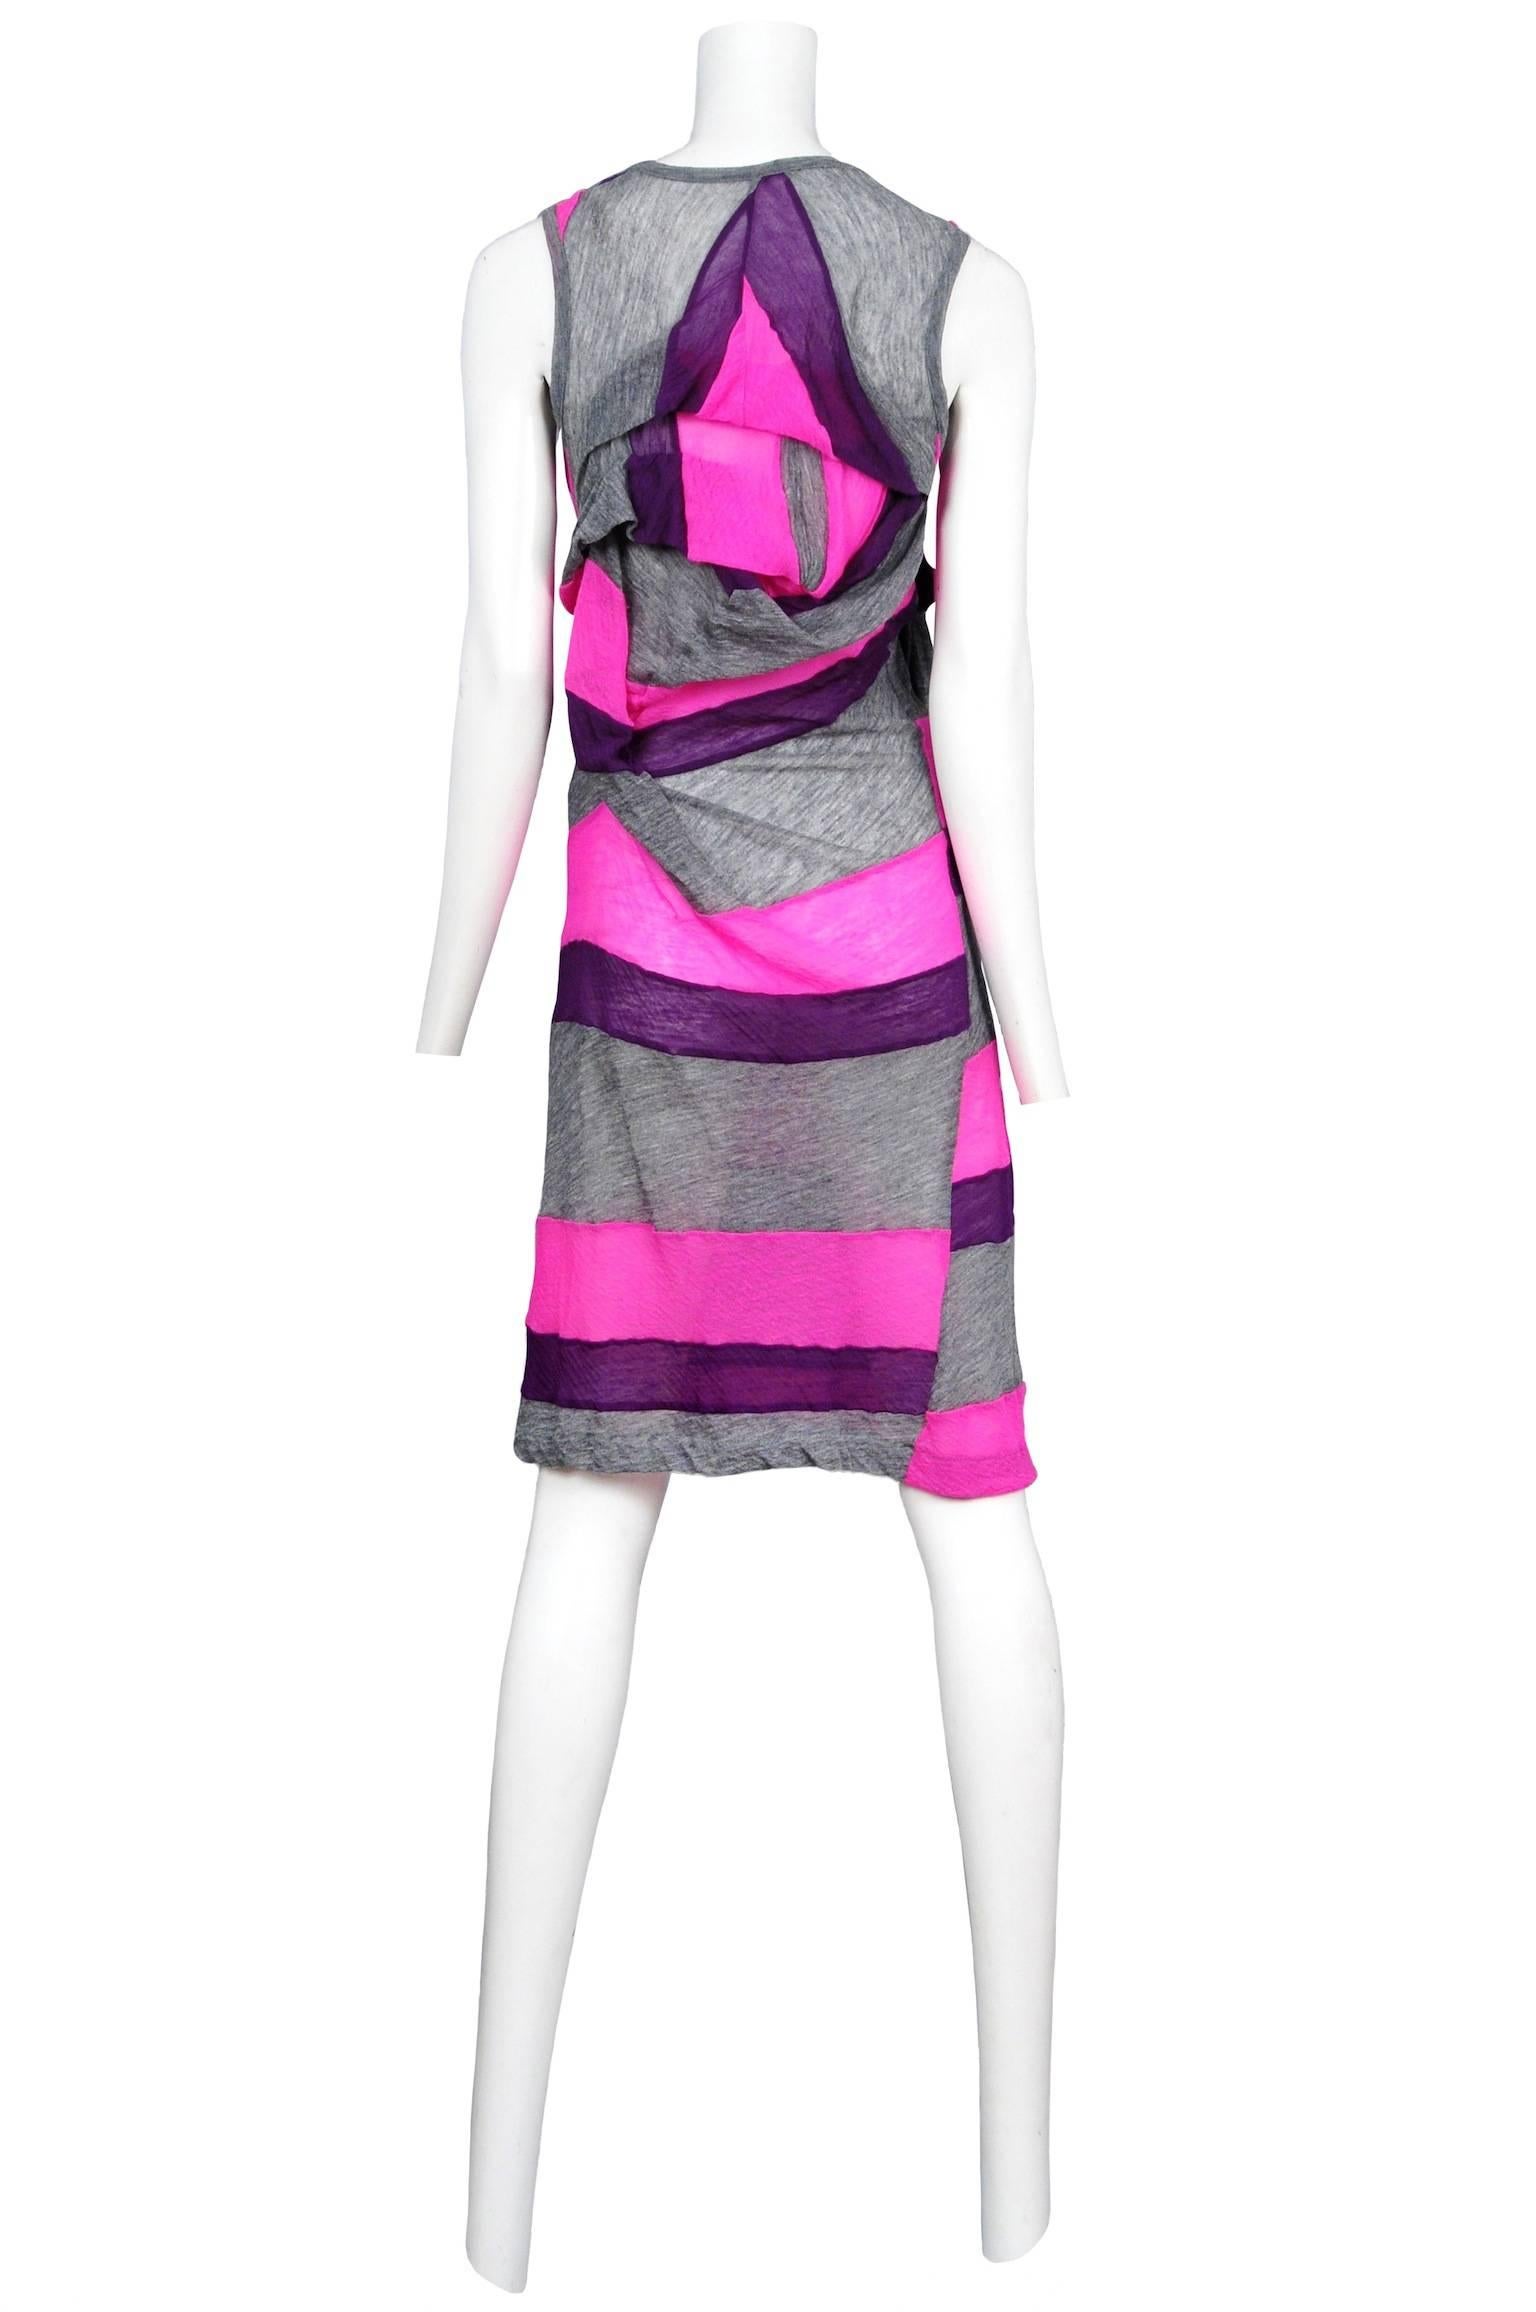 Vintage Comme des Garcons sleeveless heather grey knit dress featuring stripes of pink and purple and abstract ruffles that drape at the chest and center back. Circa 1995.

Please contact us for additional photos.